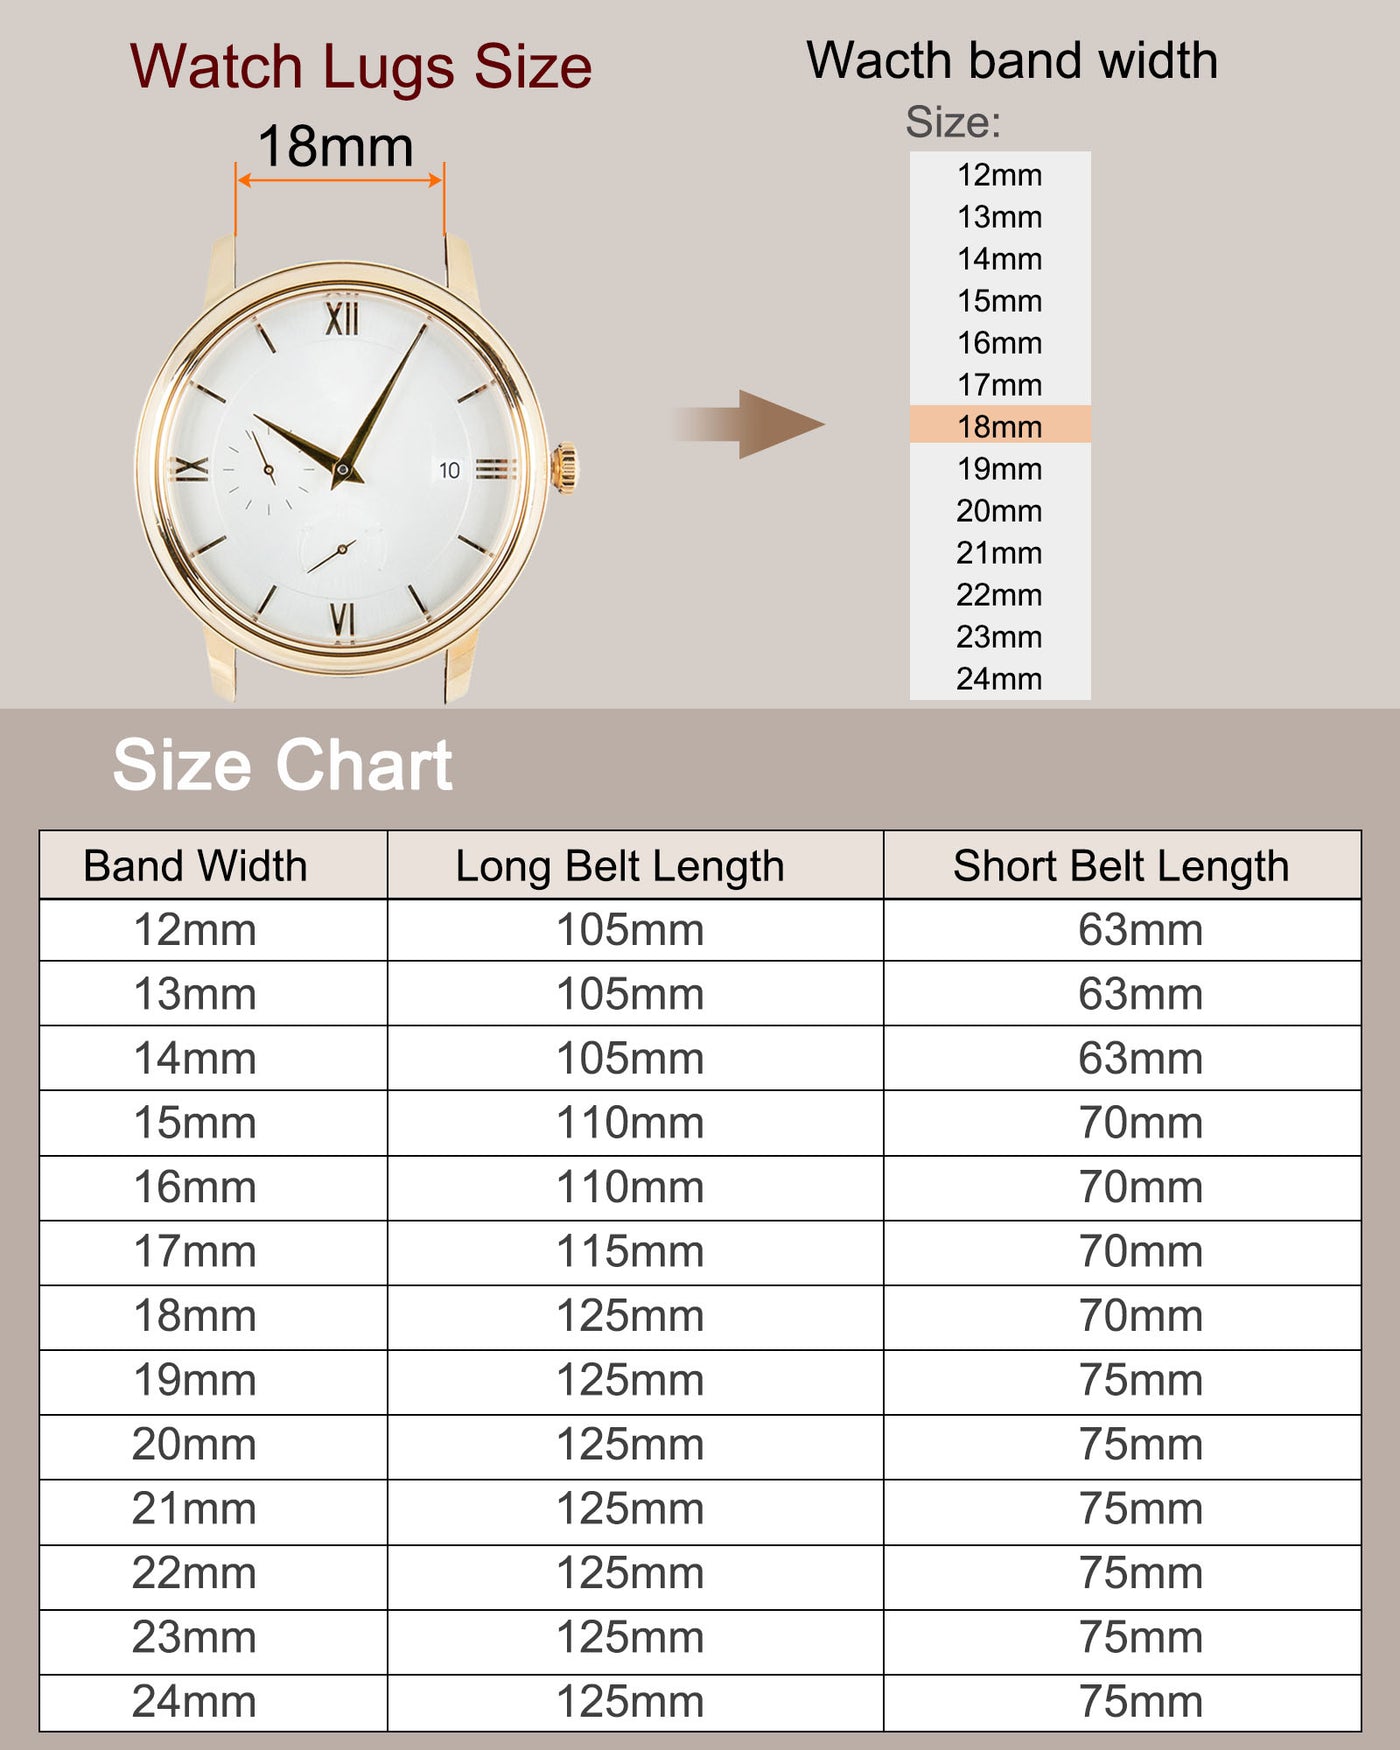 uxcell Uxcell Leather Band Deployment Buckle Watch Strap 22mm with Spring Bars, Light Brown